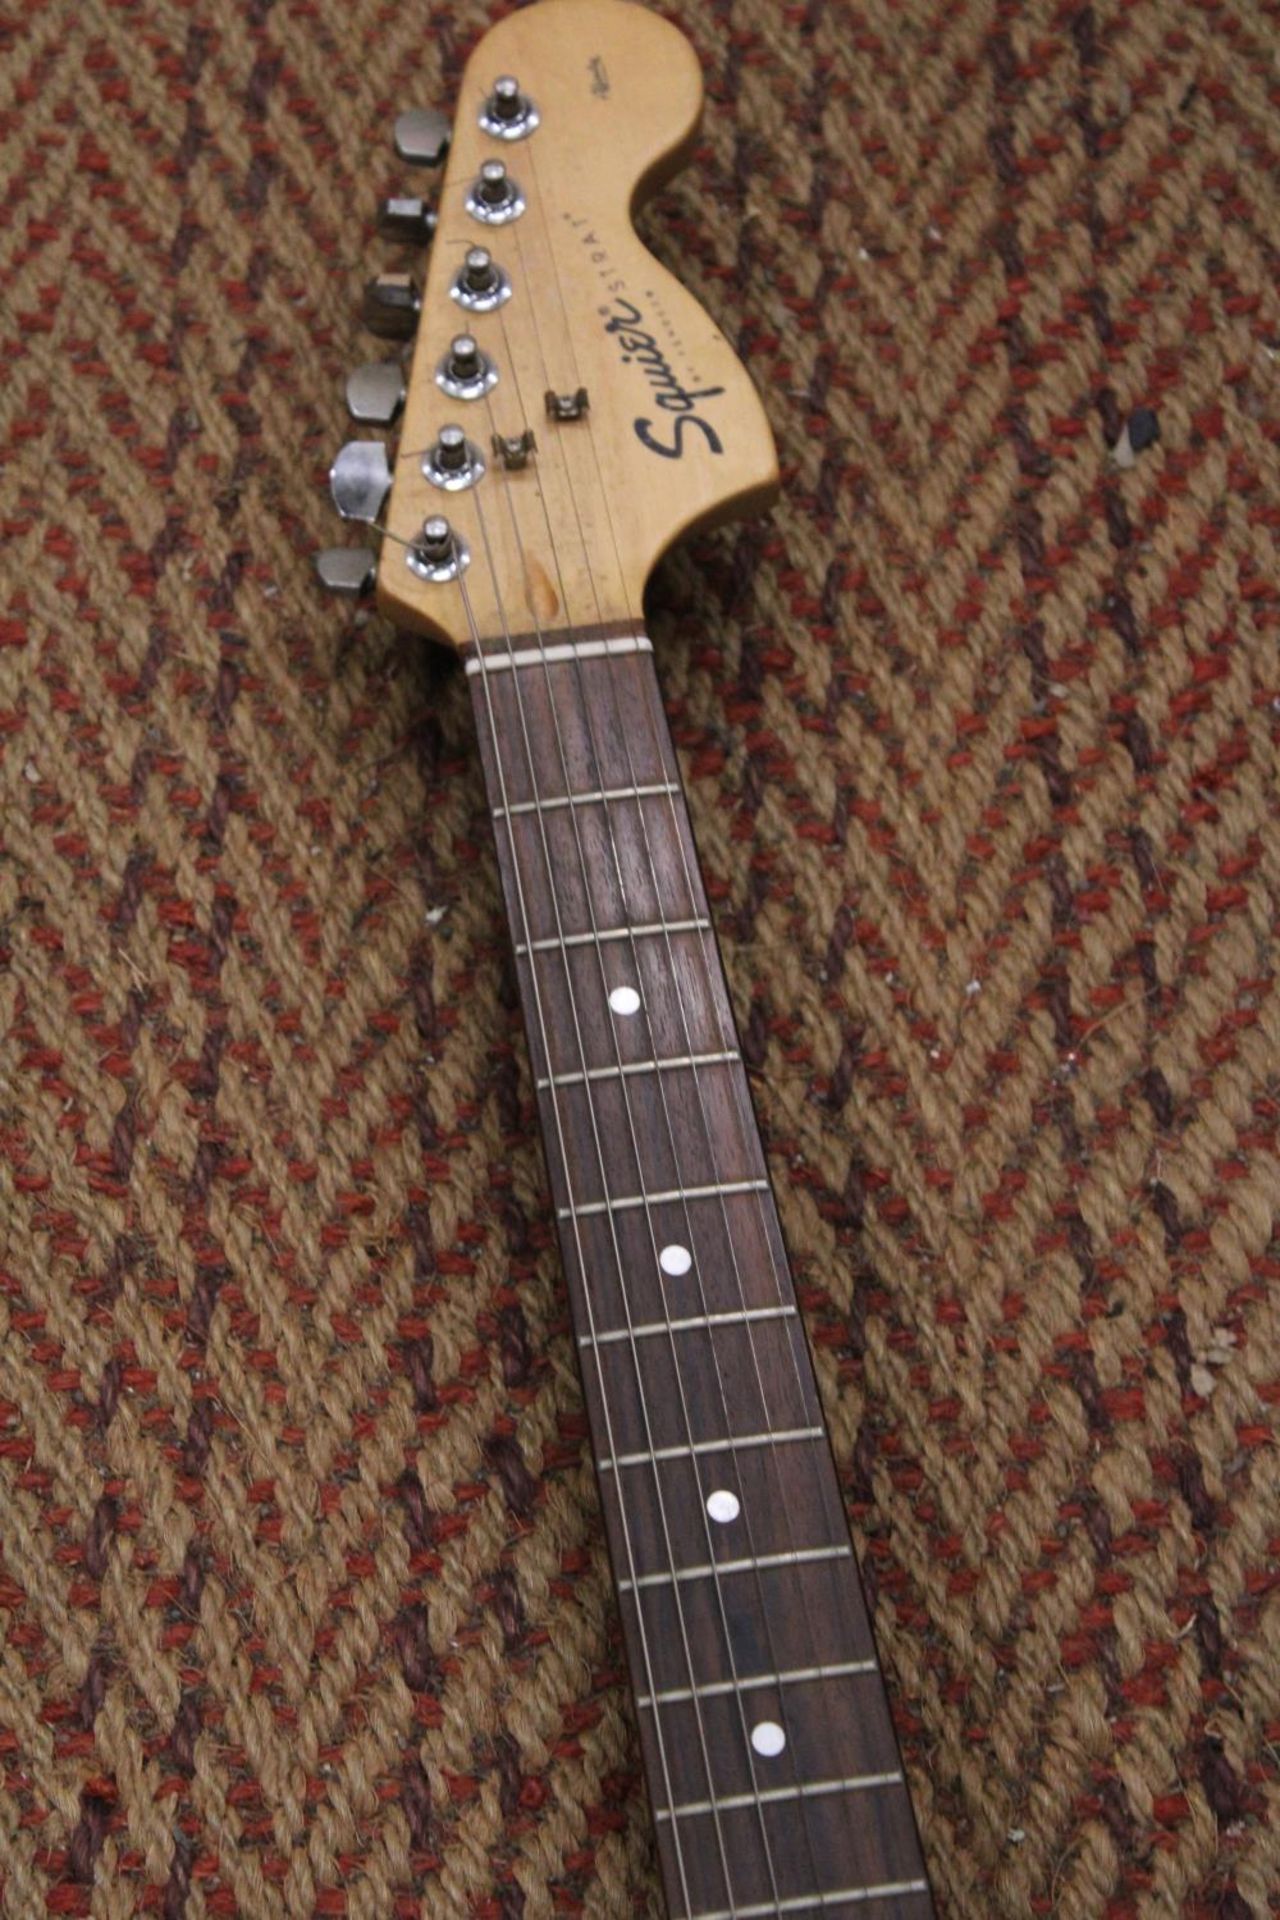 A SQUIER BLACK STRATOCASTER ELECTRIC GUITAR BY FENDER - Image 4 of 6